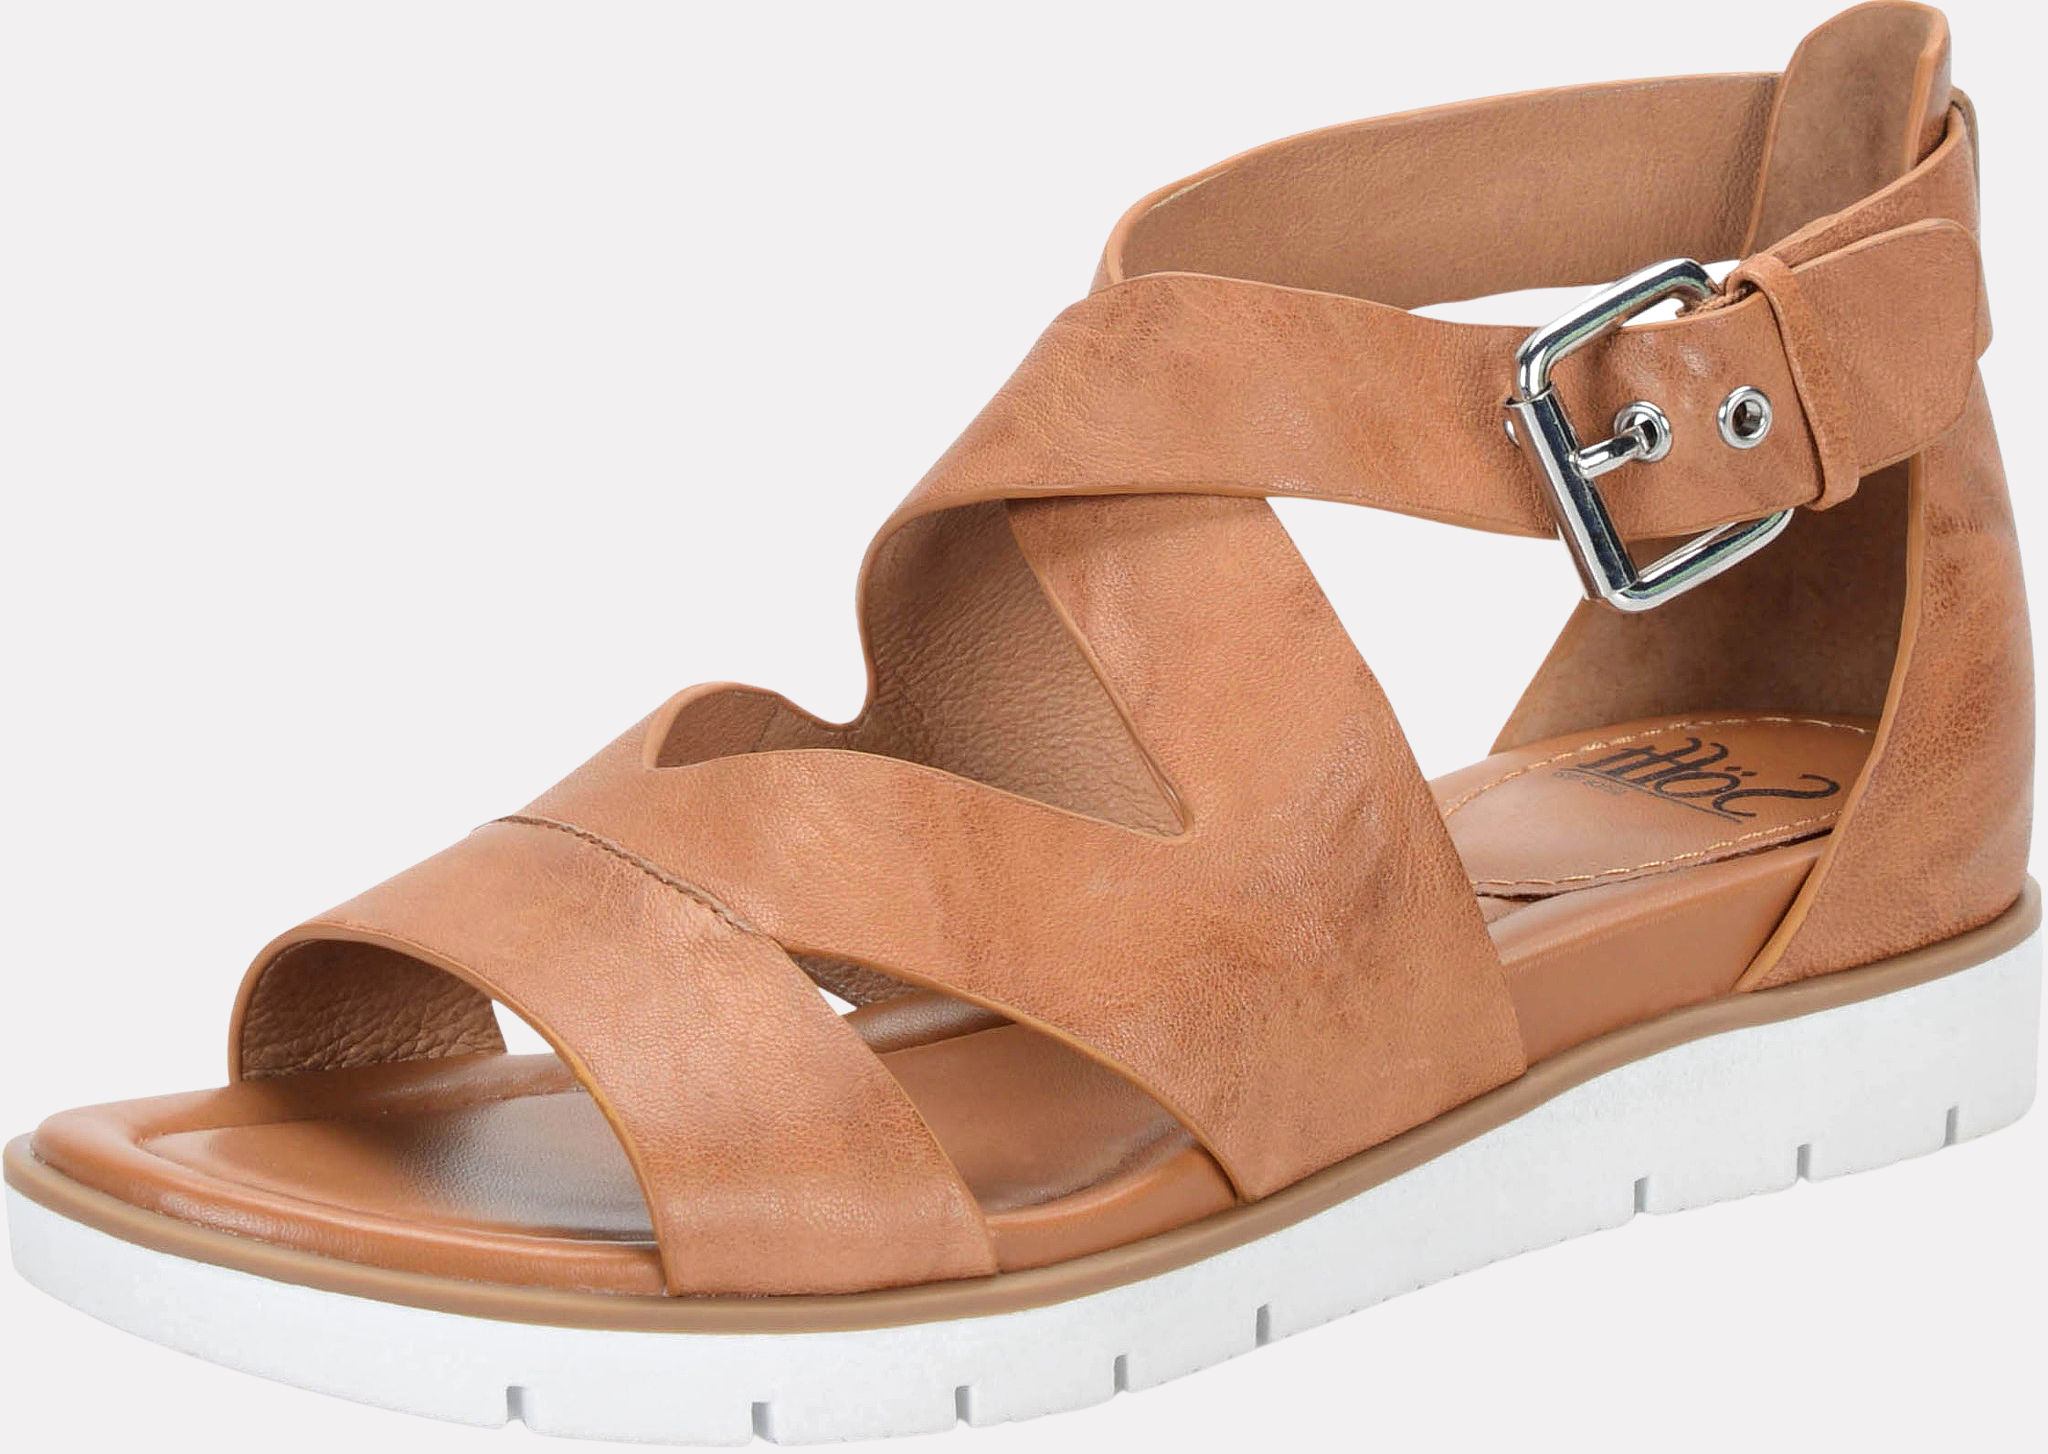 nude-sandals-sofft-mirabelle